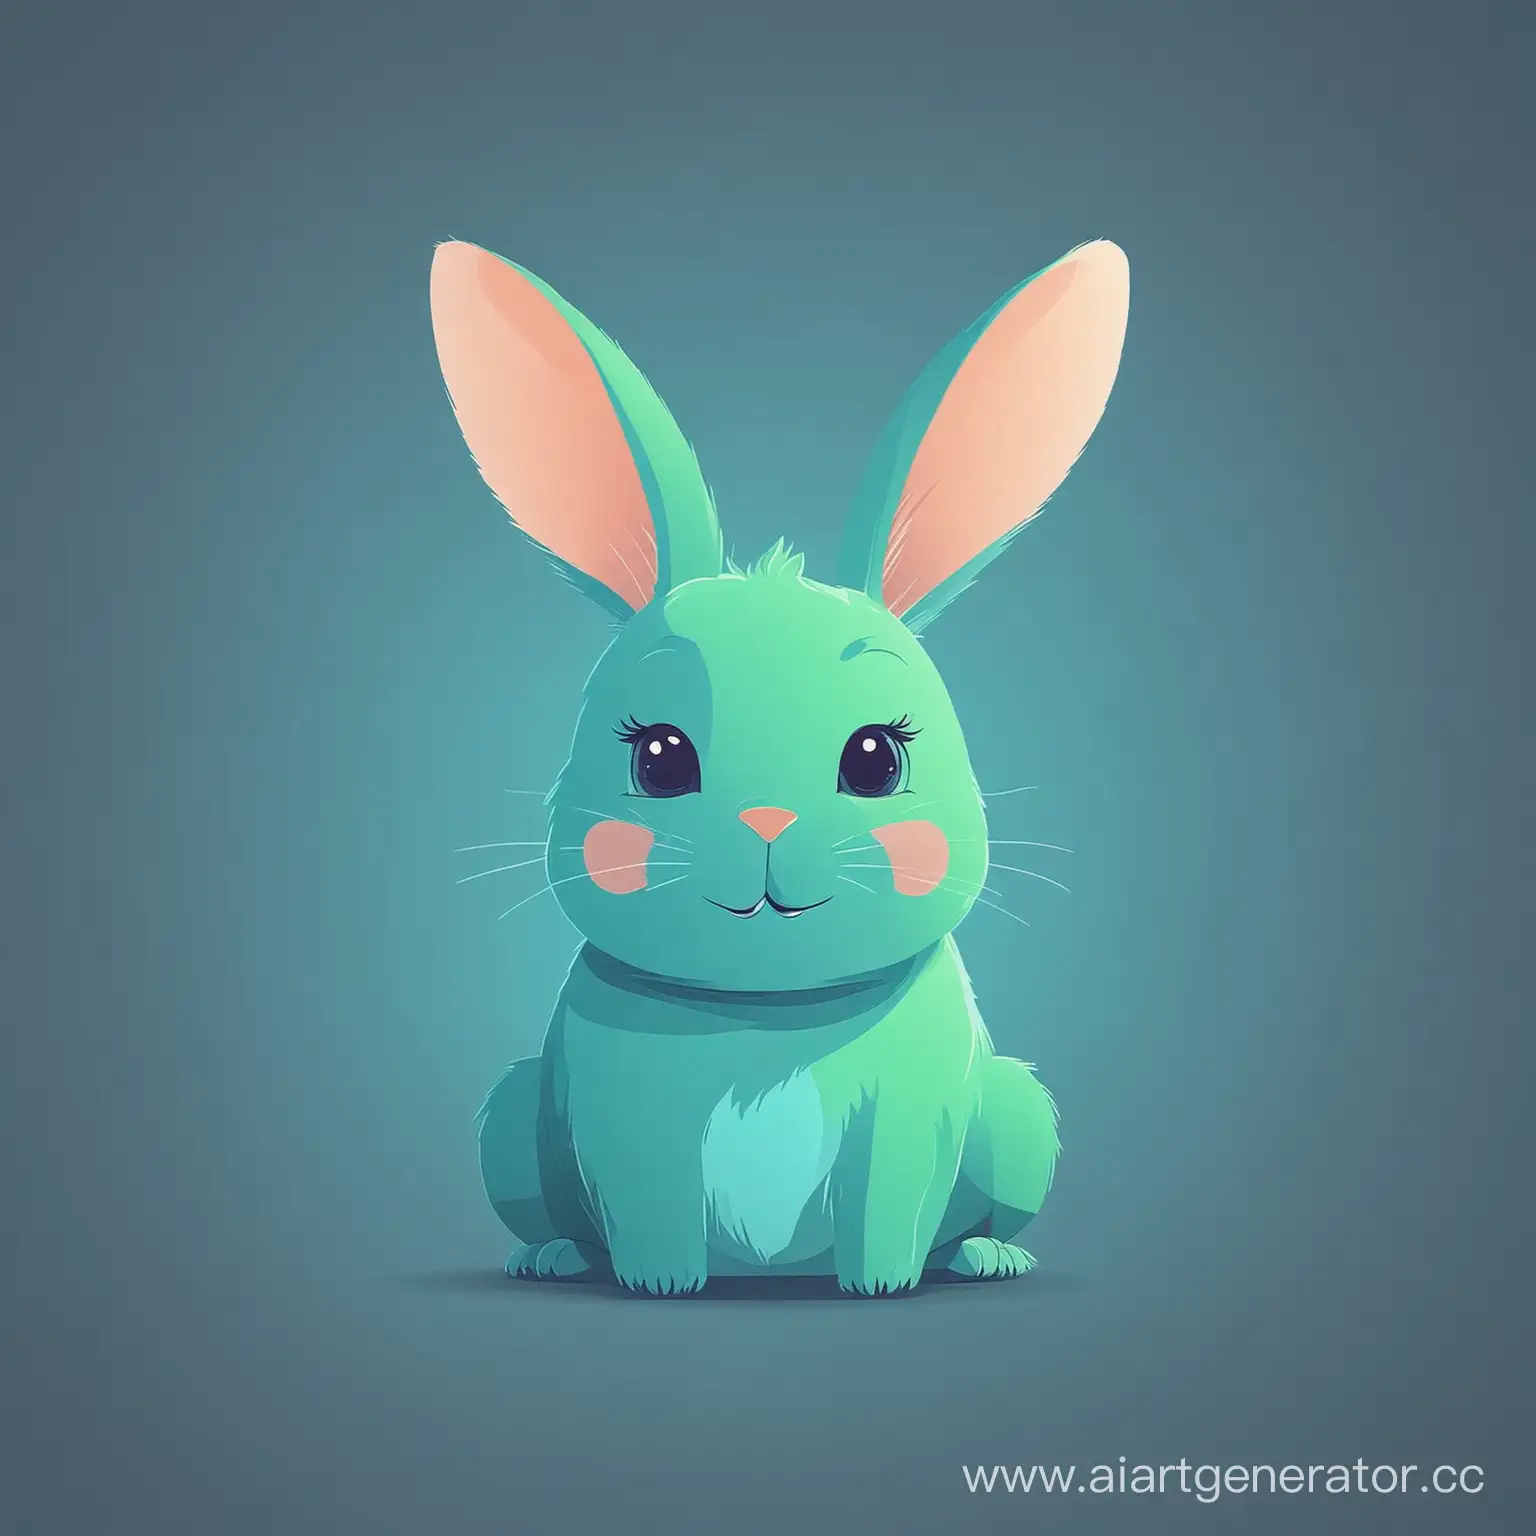 Friendly-Bunny-Vector-Illustration-Simplistic-and-Kind-Character-in-Bright-Blue-and-Green-Tones